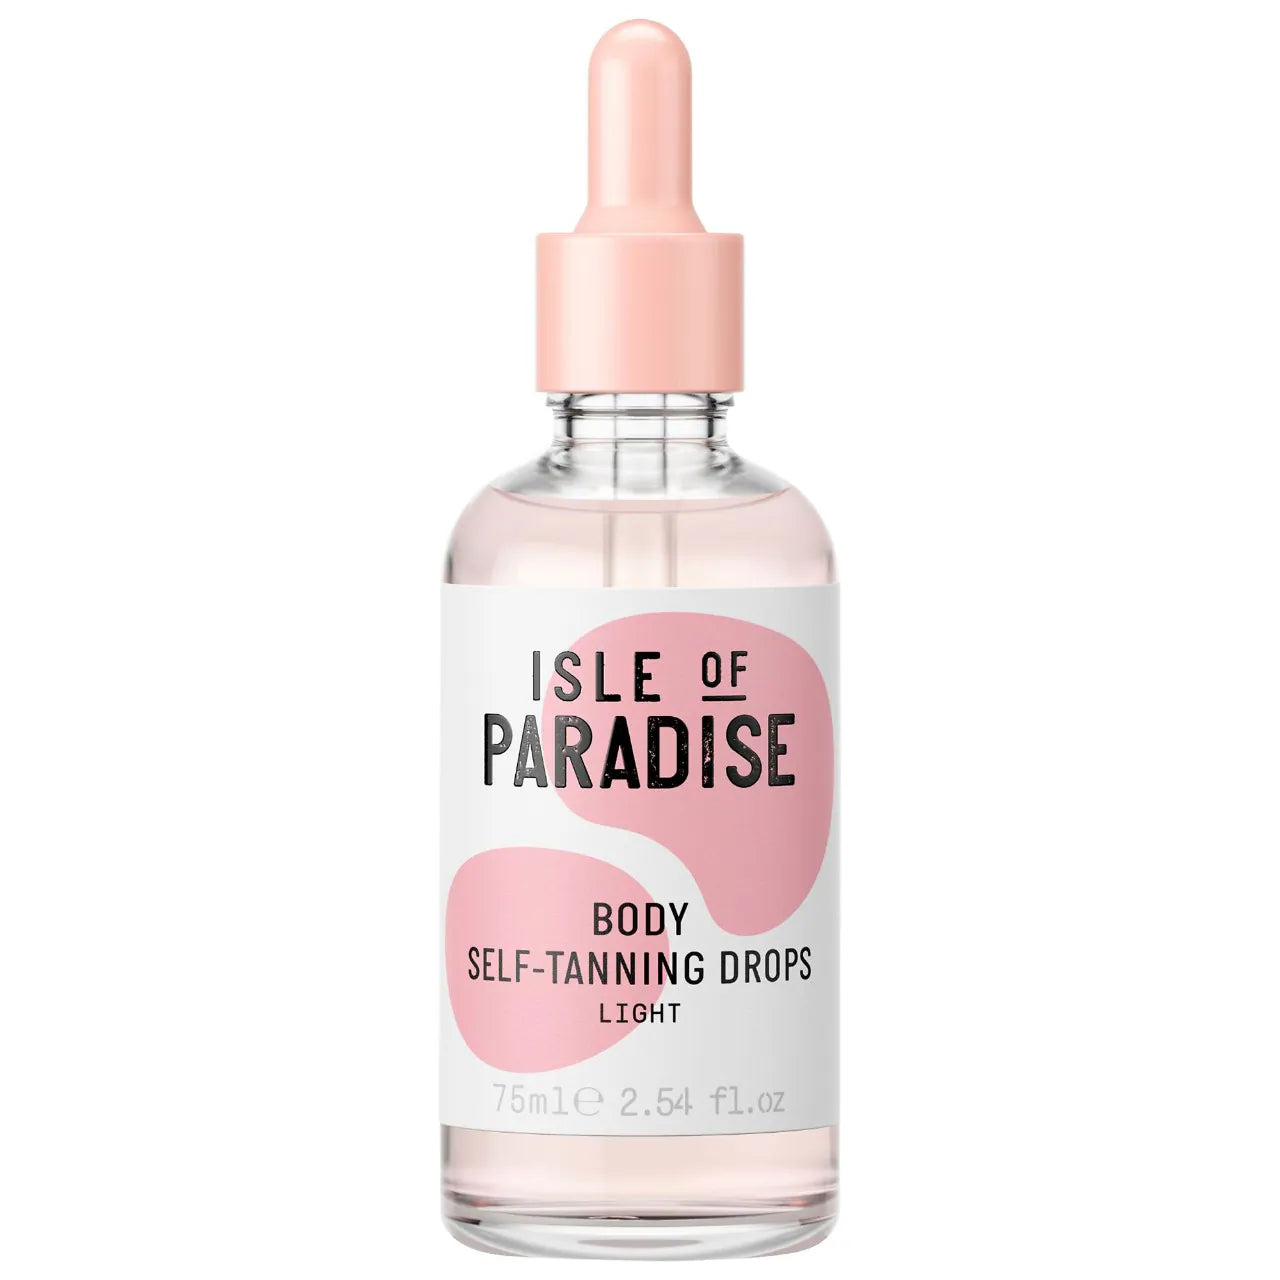 Isle of Paradise - Self-Tanning Firming Body Drops